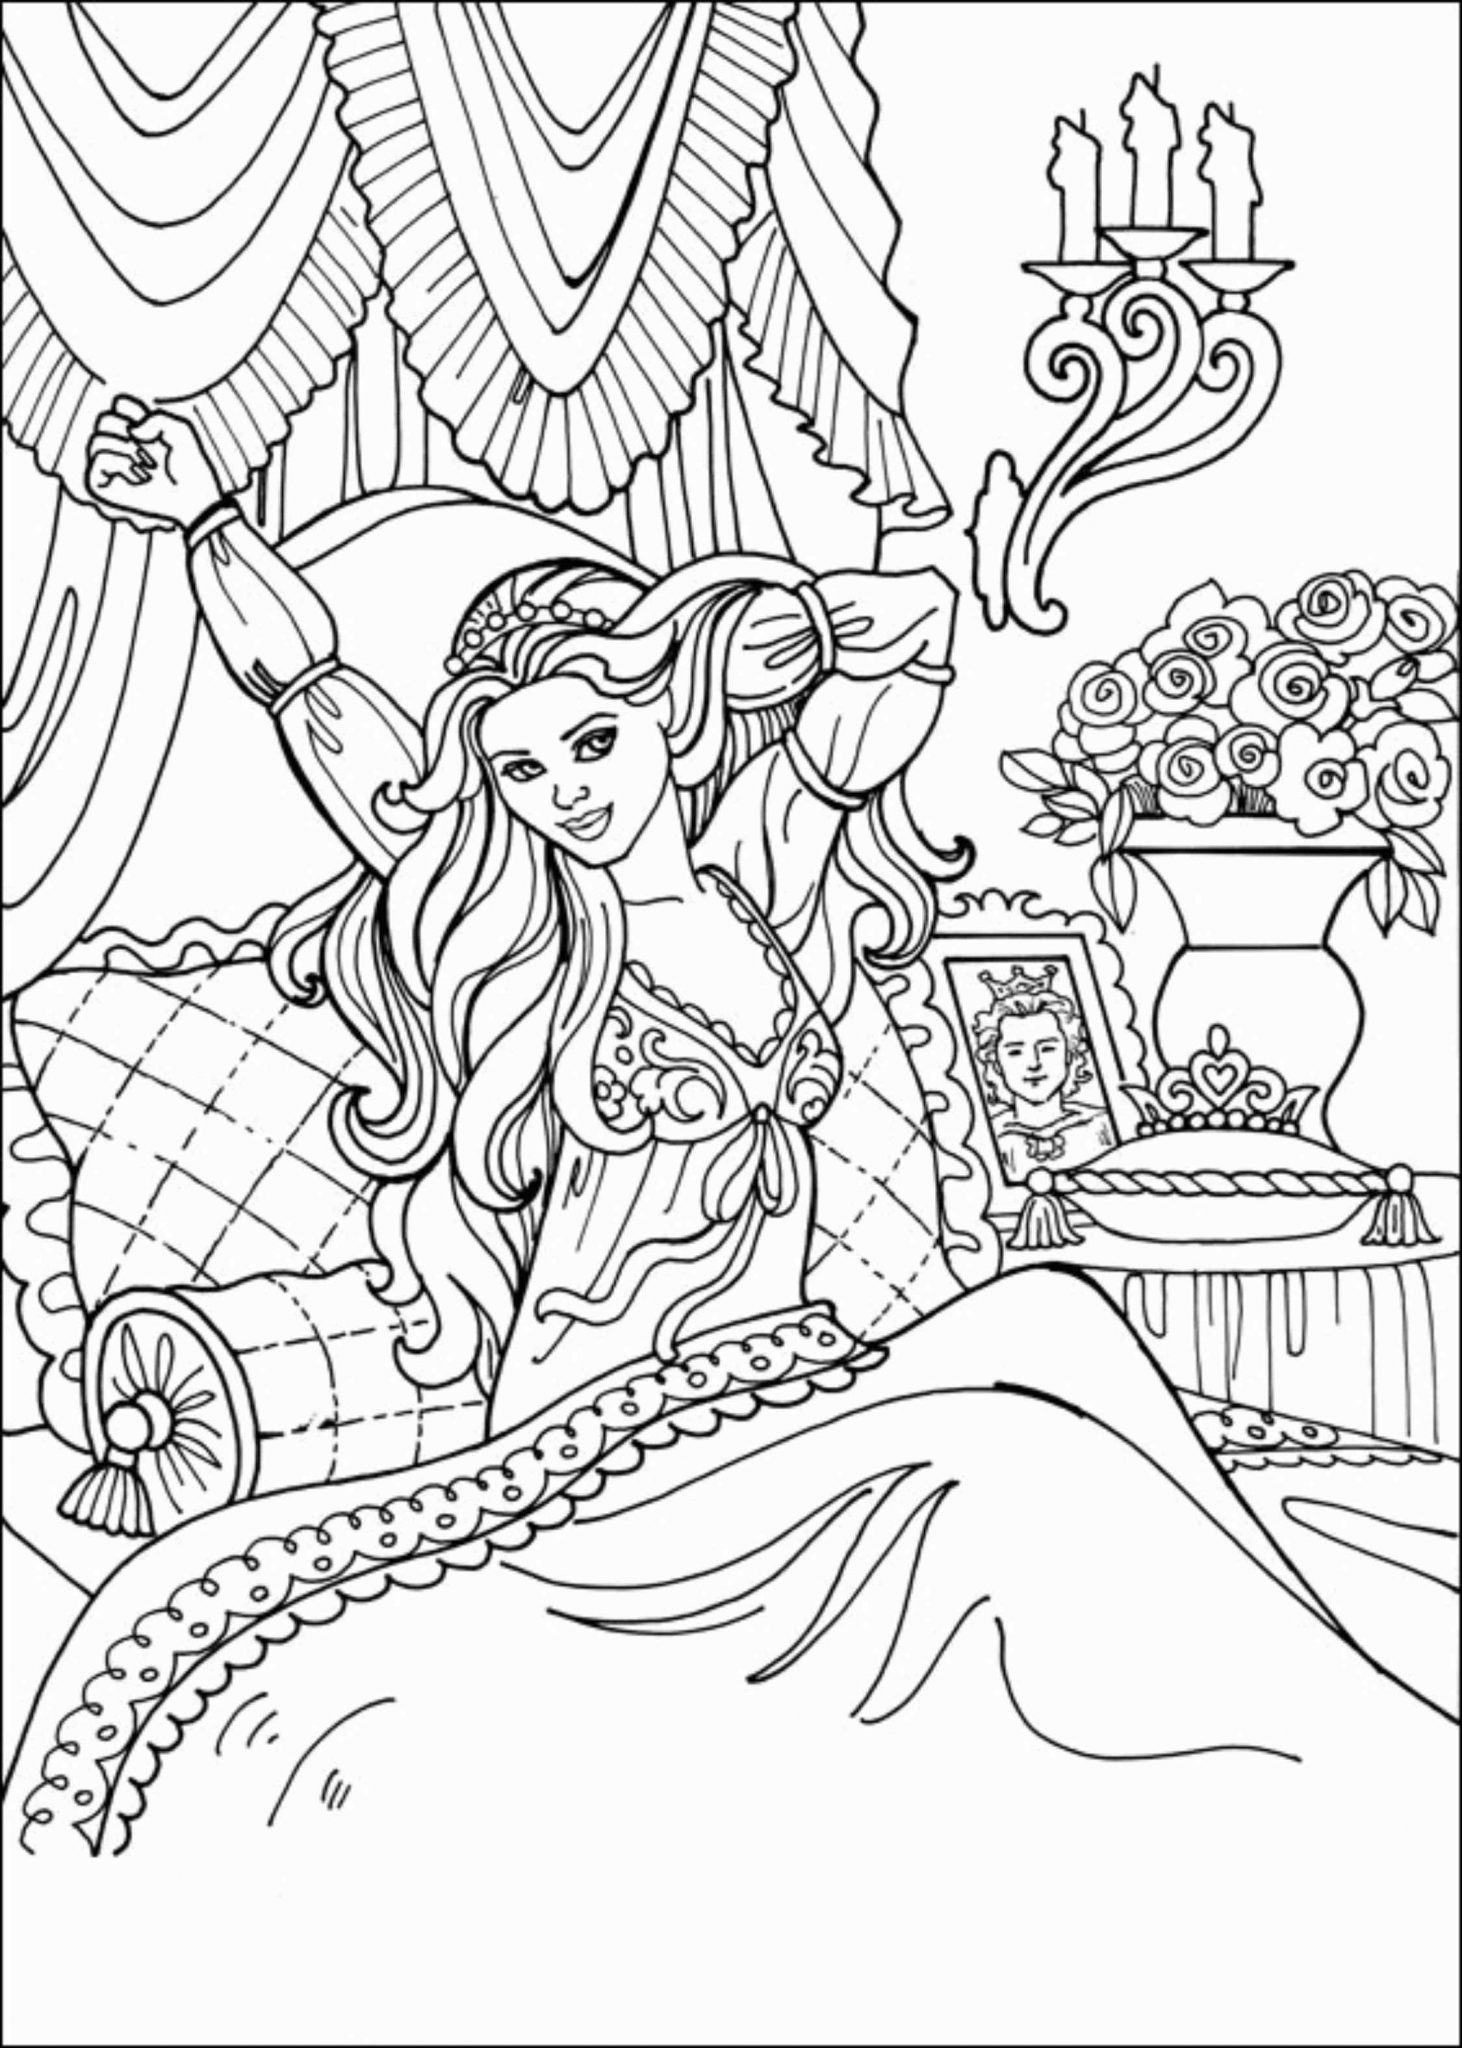 Print &Amp; Download - Princess Coloring Pages, Support The Child’s Activity